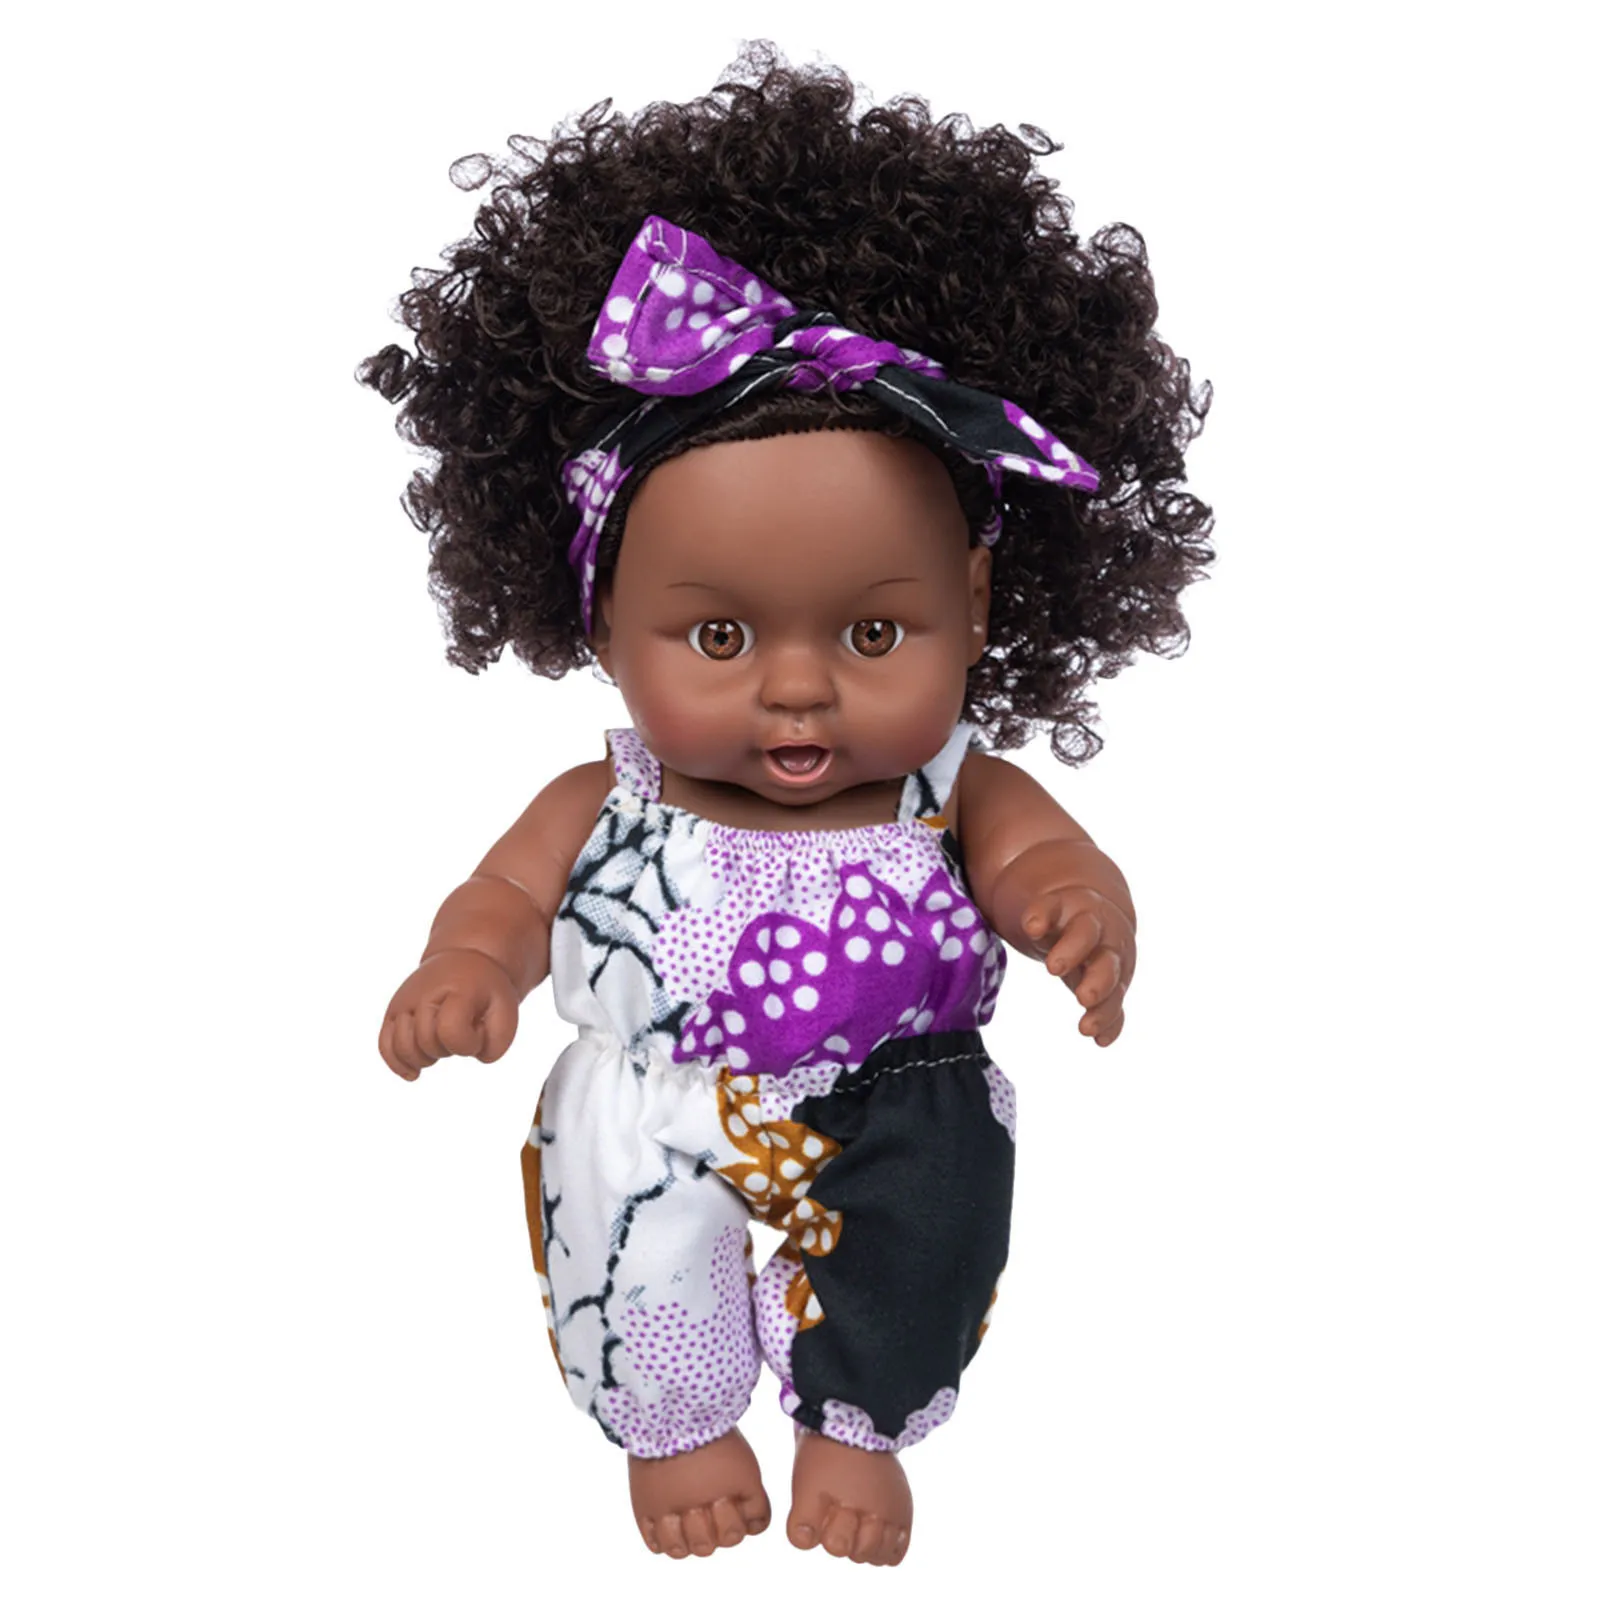 Pcs anime figure black african black baby cute curly black inch vinyl baby toy ornaments